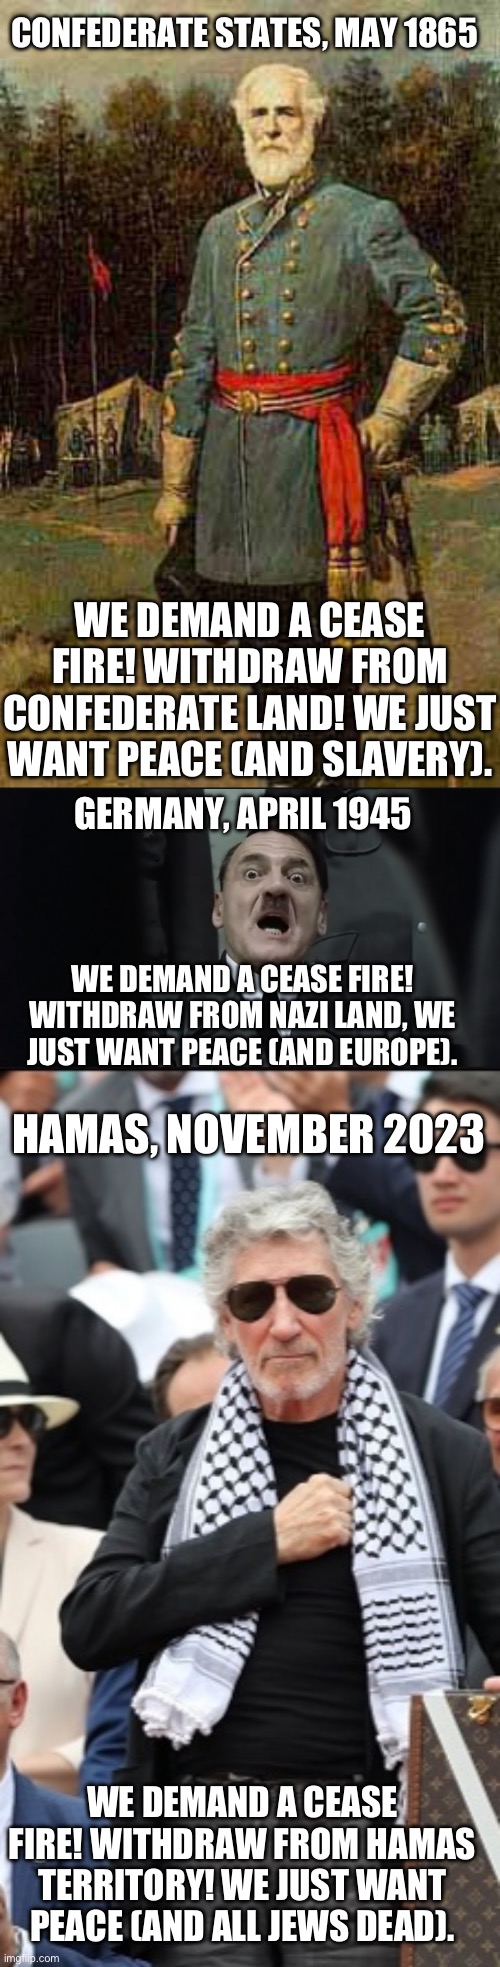 Cease fire!? | CONFEDERATE STATES, MAY 1865; WE DEMAND A CEASE FIRE! WITHDRAW FROM CONFEDERATE LAND! WE JUST WANT PEACE (AND SLAVERY). GERMANY, APRIL 1945; WE DEMAND A CEASE FIRE! WITHDRAW FROM NAZI LAND, WE JUST WANT PEACE (AND EUROPE). HAMAS, NOVEMBER 2023; WE DEMAND A CEASE FIRE! WITHDRAW FROM HAMAS TERRITORY! WE JUST WANT PEACE (AND ALL JEWS DEAD). | image tagged in general robert e lee,scared hitler,roger waters,israel | made w/ Imgflip meme maker